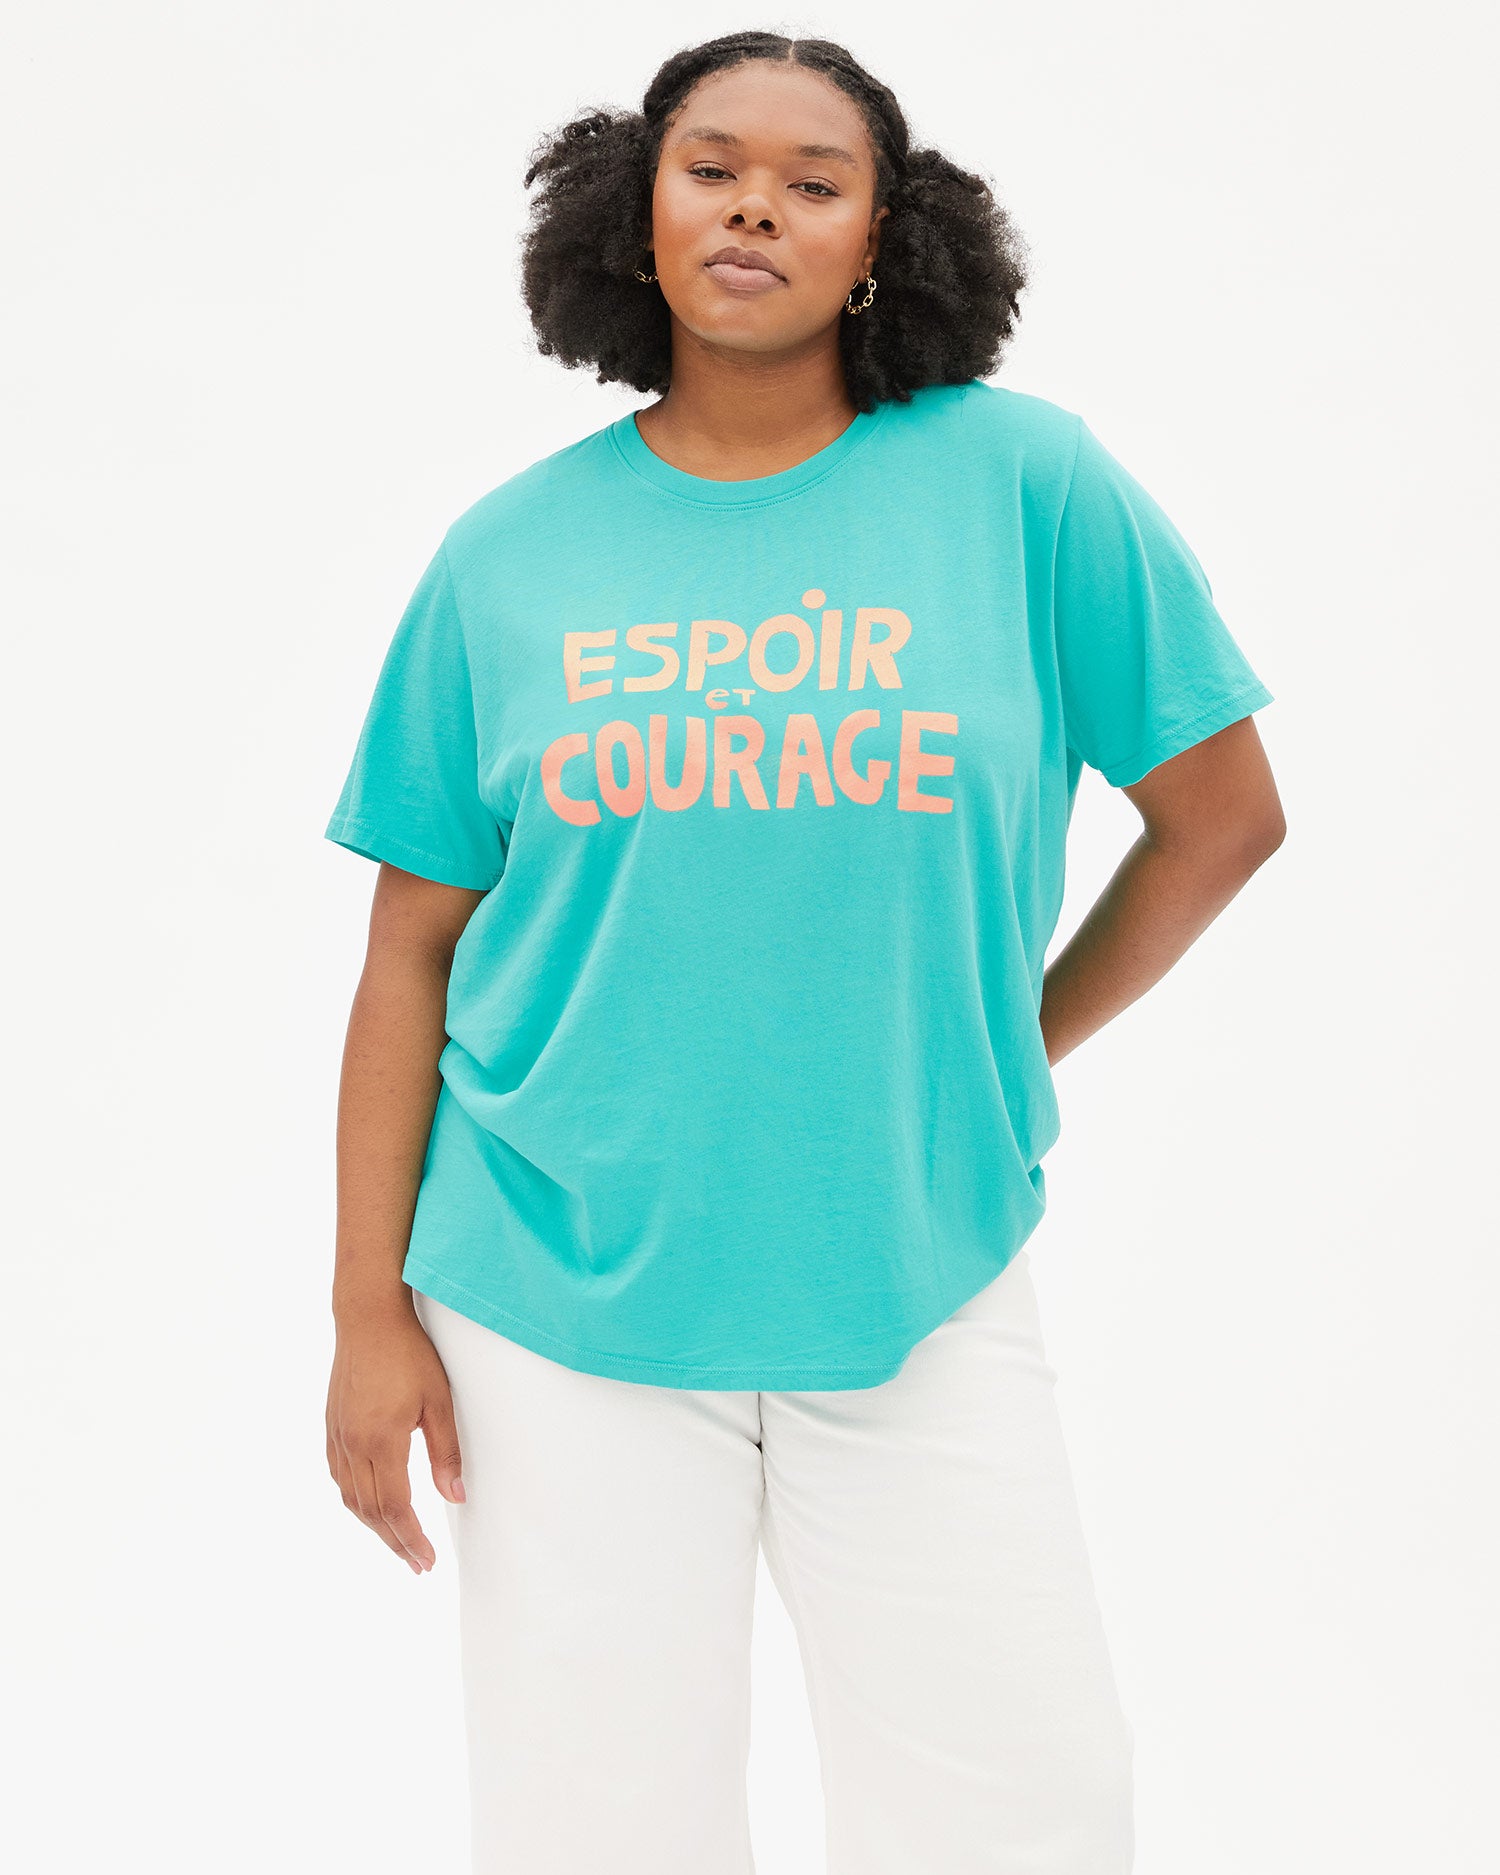 Candace wearing the Desert Turquoise Espoir et Courage Original Tee with white jeans with her left hand behind her back